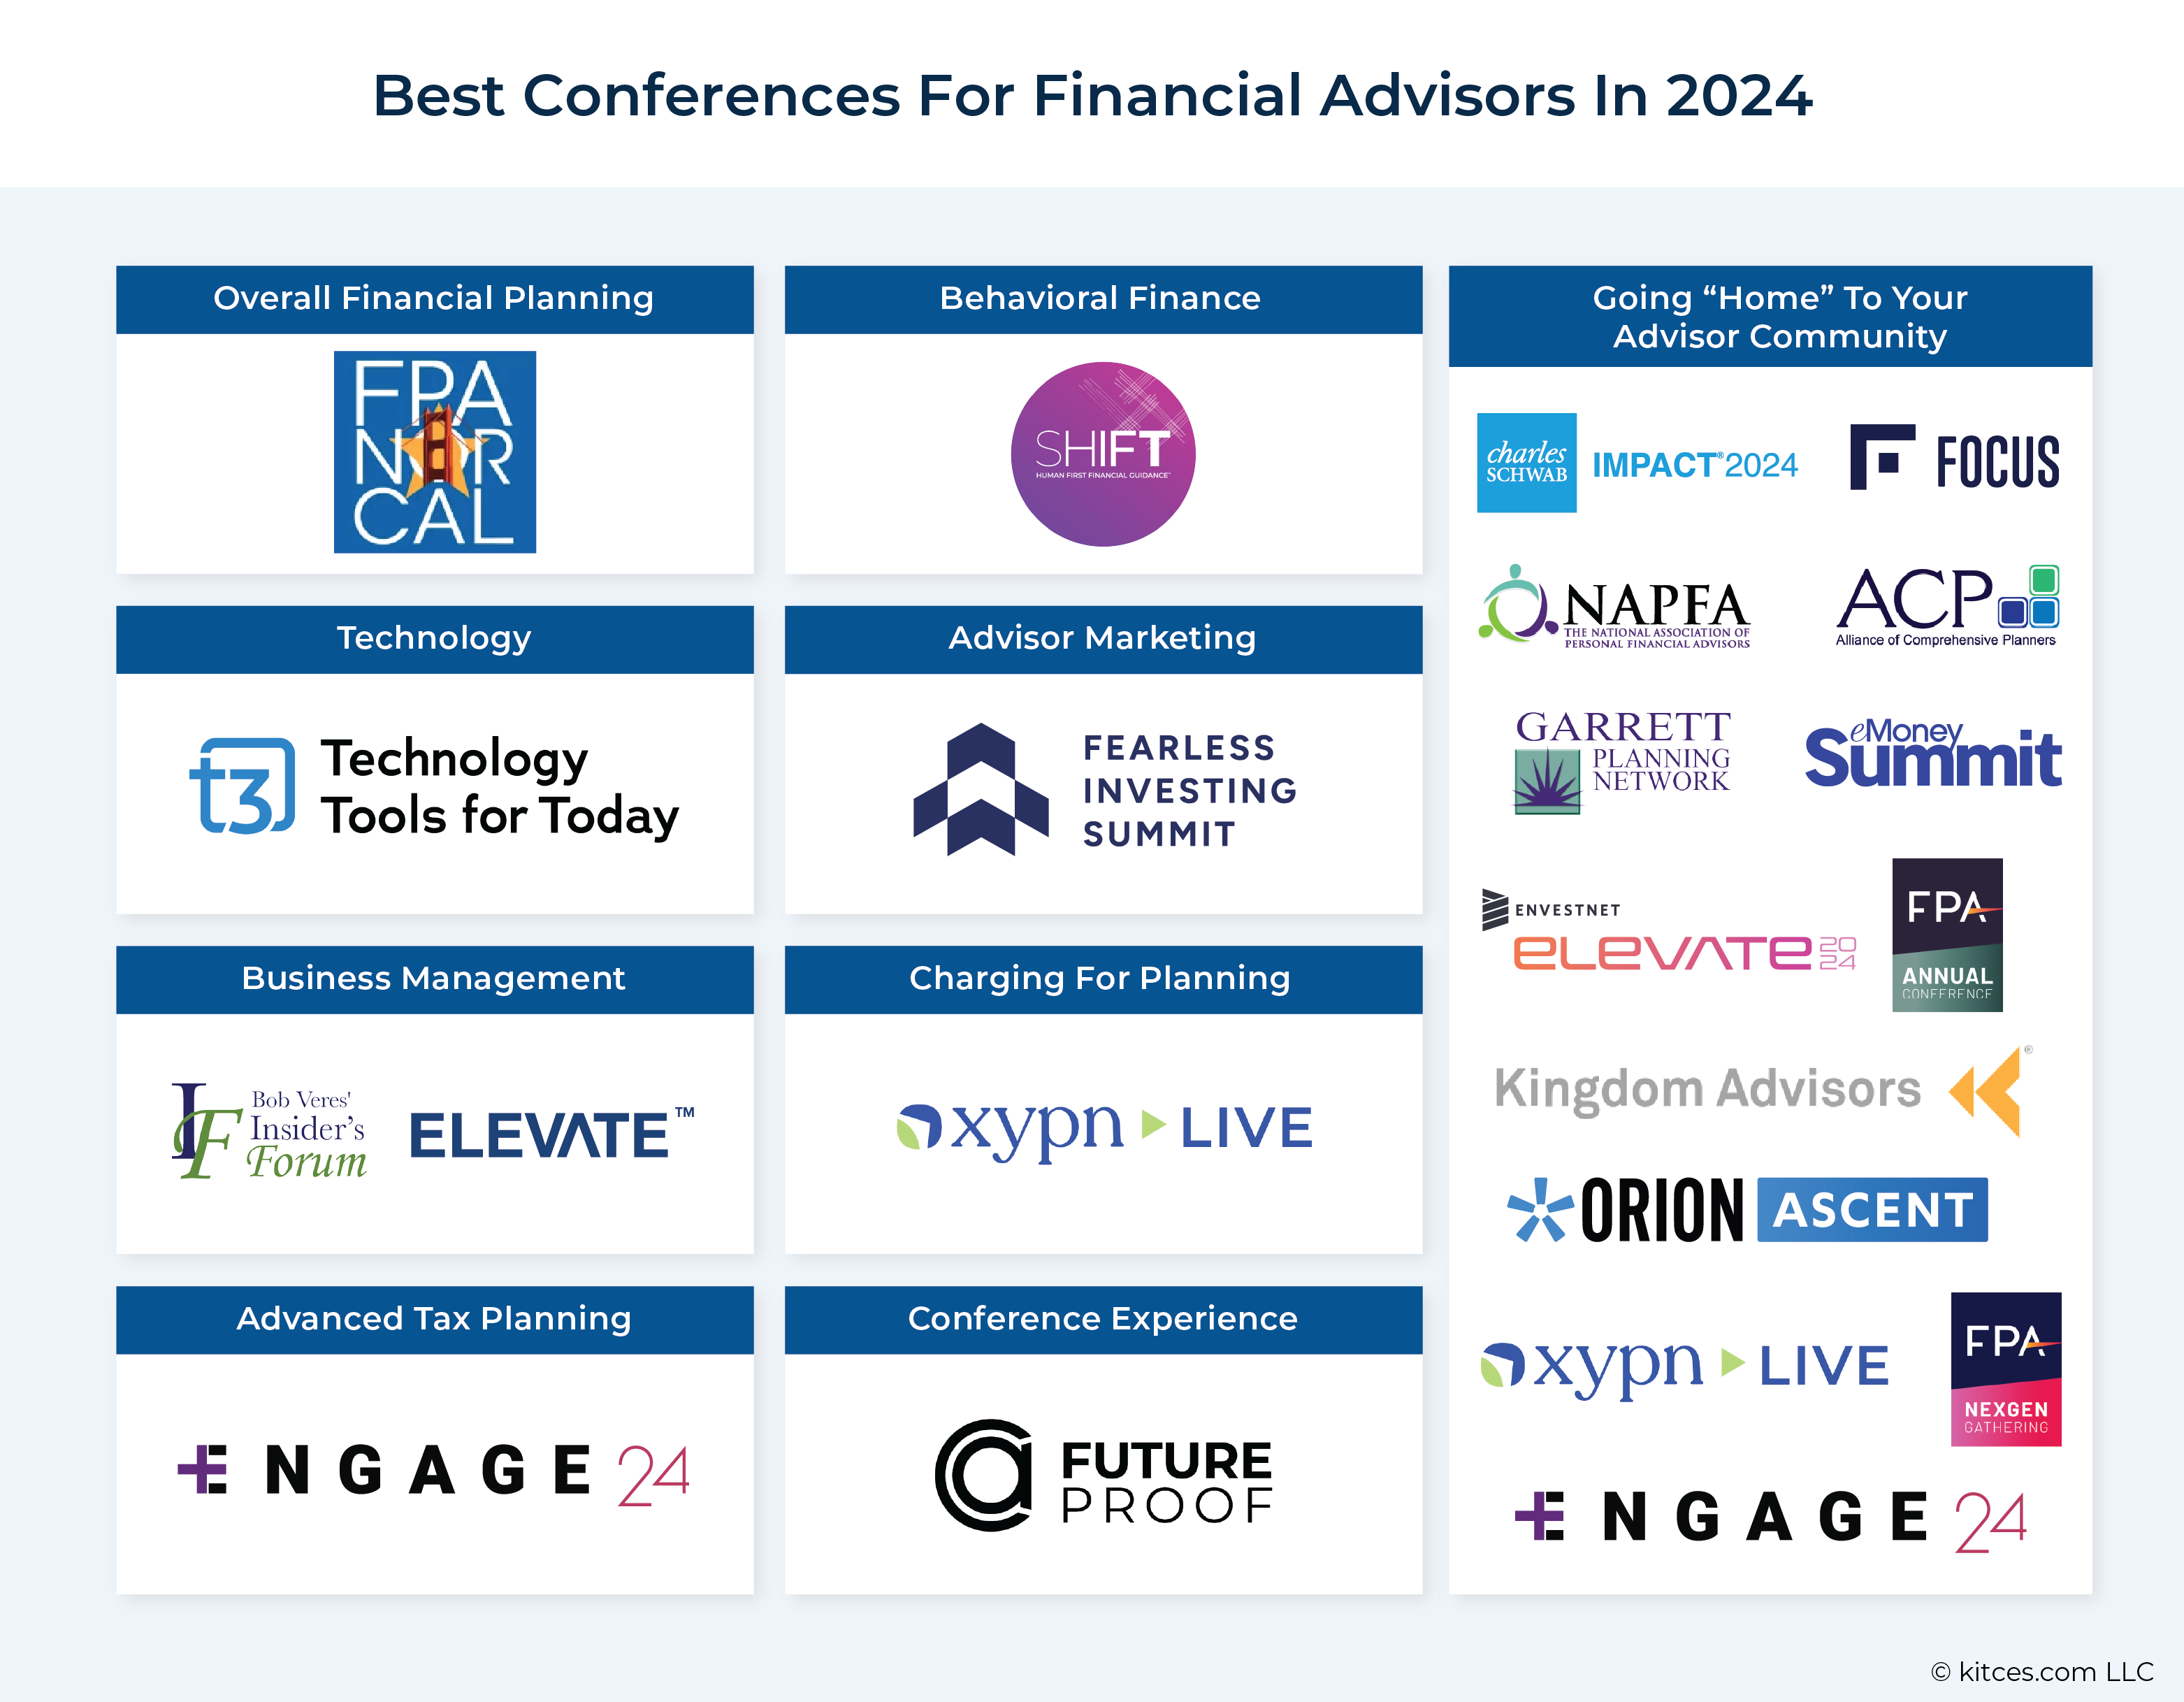 Best Conferences For Financial Advisors In